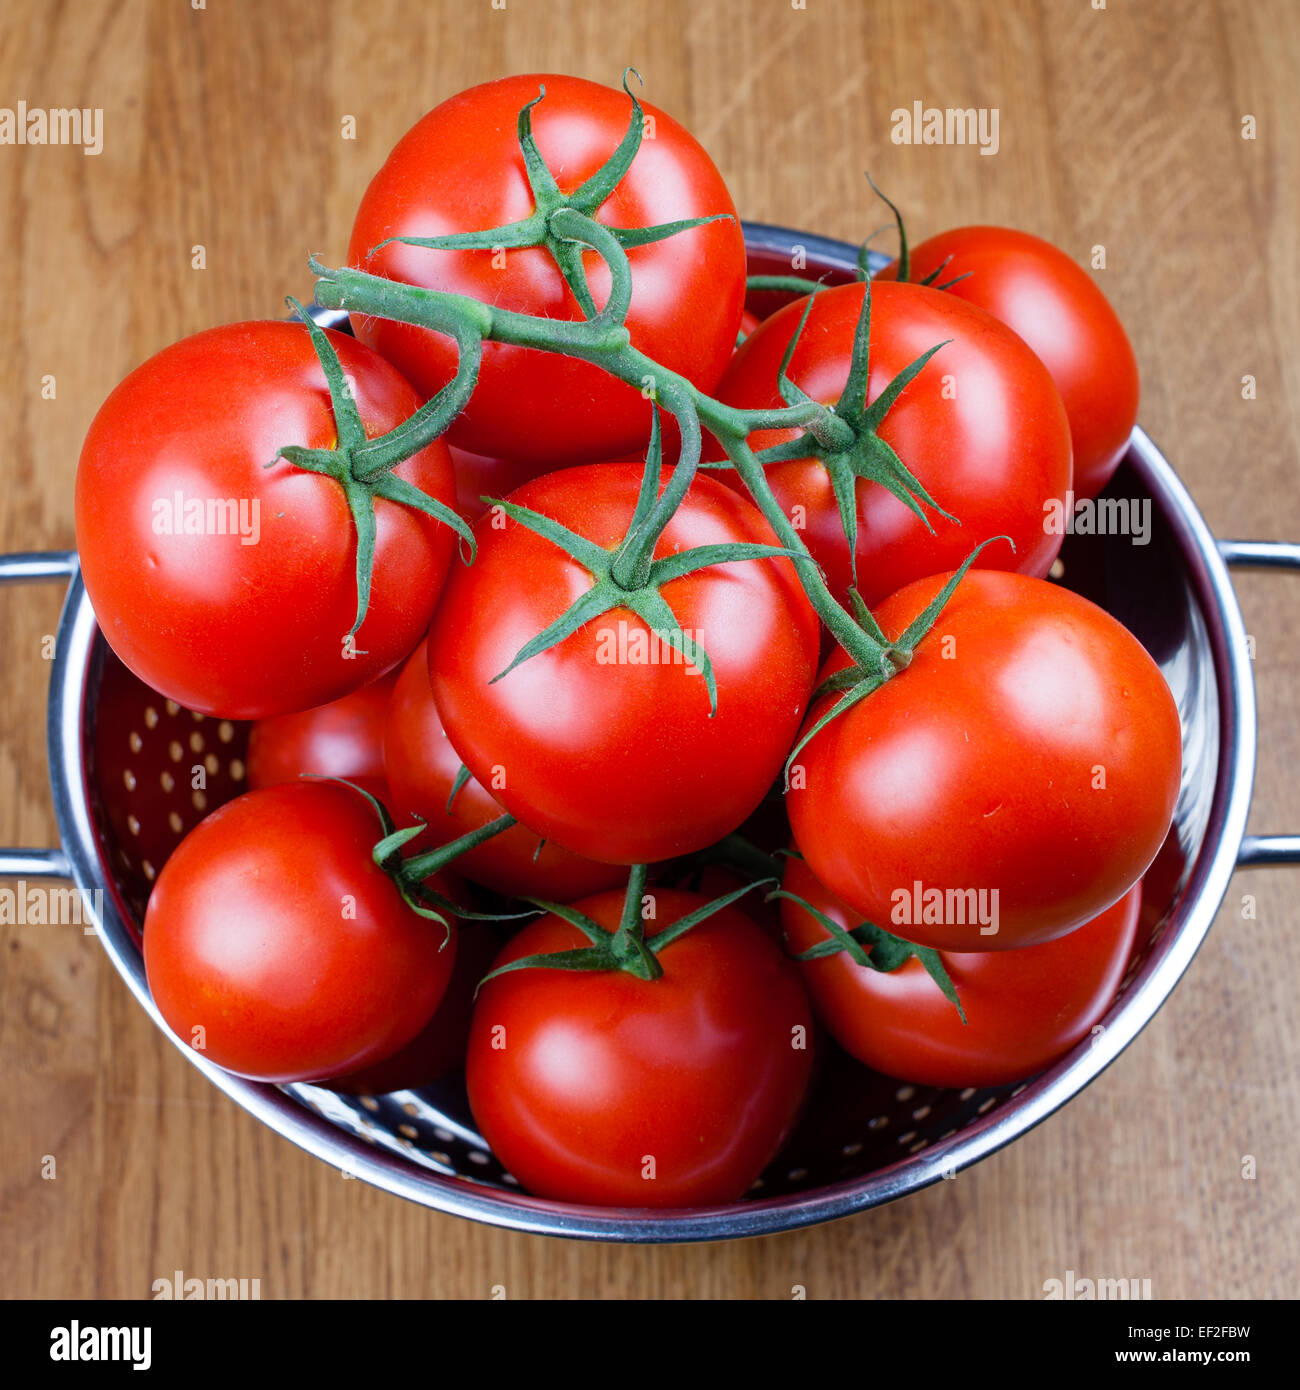 Tomatoes in a drying bowl. Stock Photo